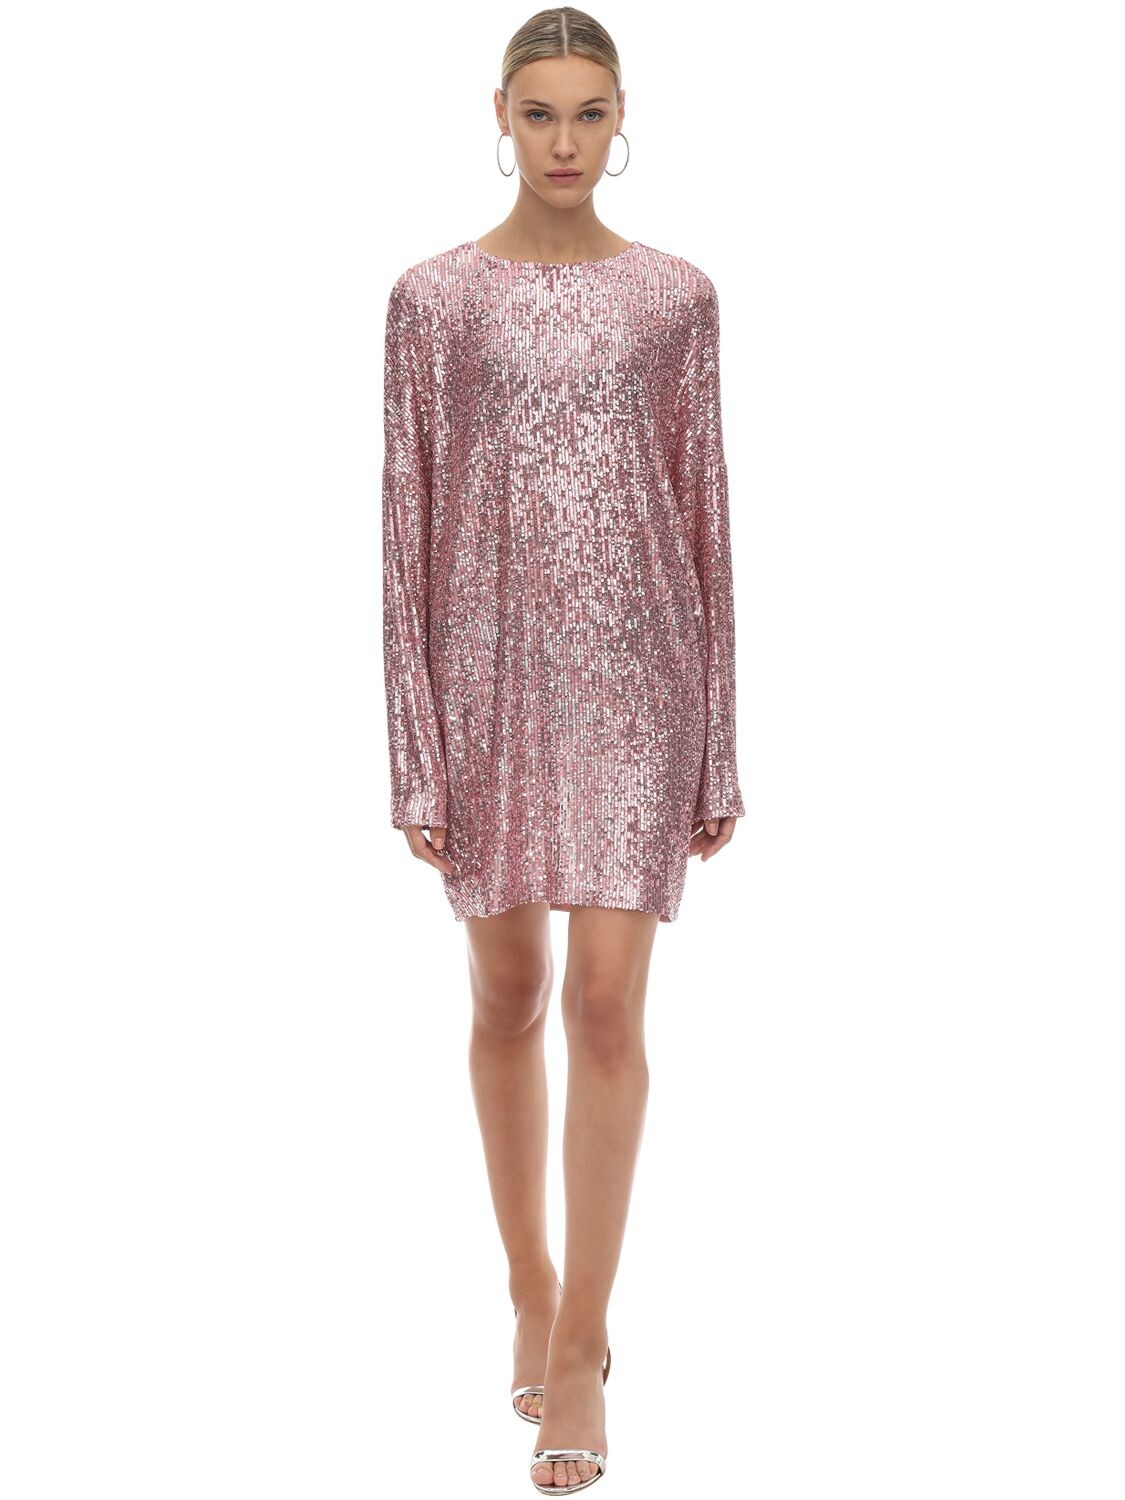 IN THE MOOD FOR LOVE SEQUINED MINI DRESS W/ BATWING SLEEVES,71IXKL016-UK9TRQ2